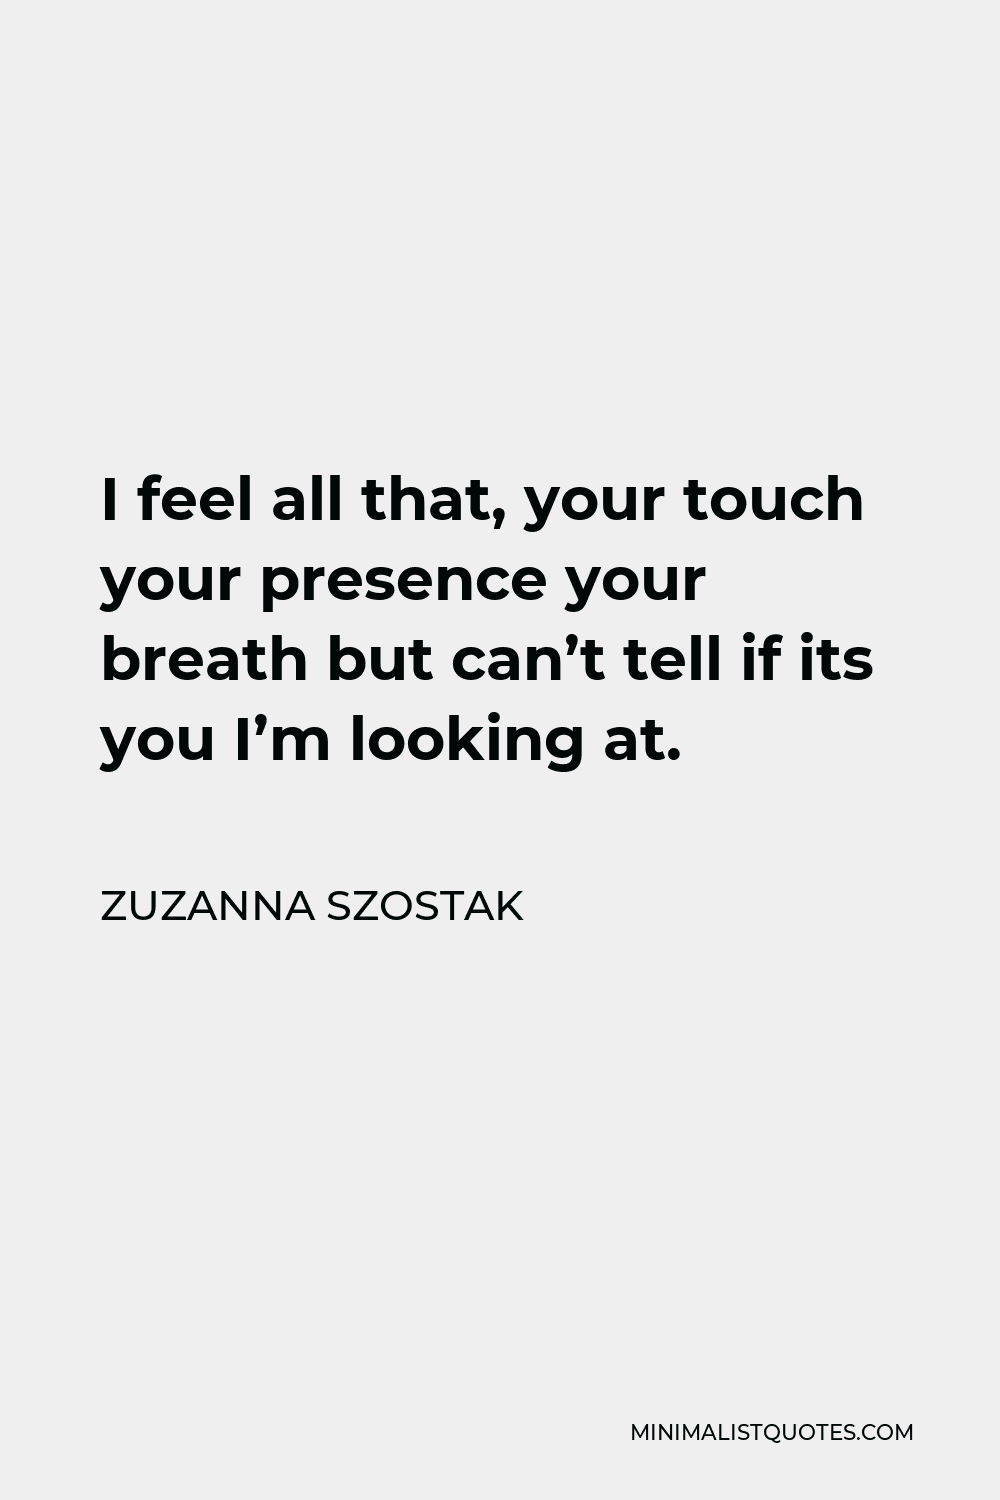 Zuzanna Szostak Quote - I feel all that, your touch your presence your breath but can’t tell if its you I’m looking at.